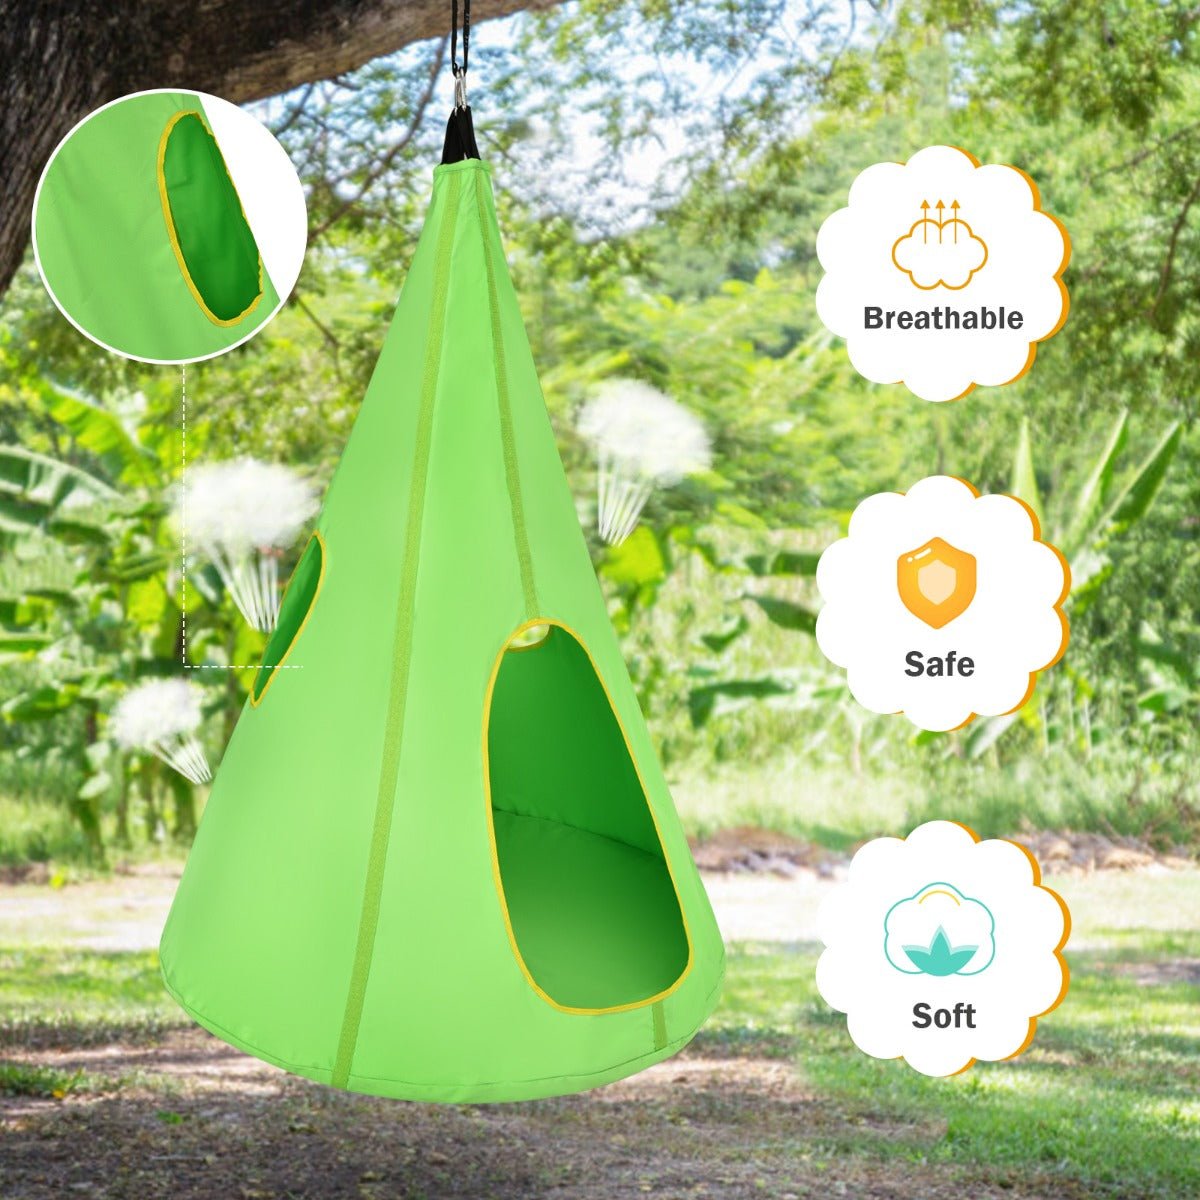 Wholesome Play: Kids Nest Swing Tent Green 80cm, Swing into Nature's Embrace